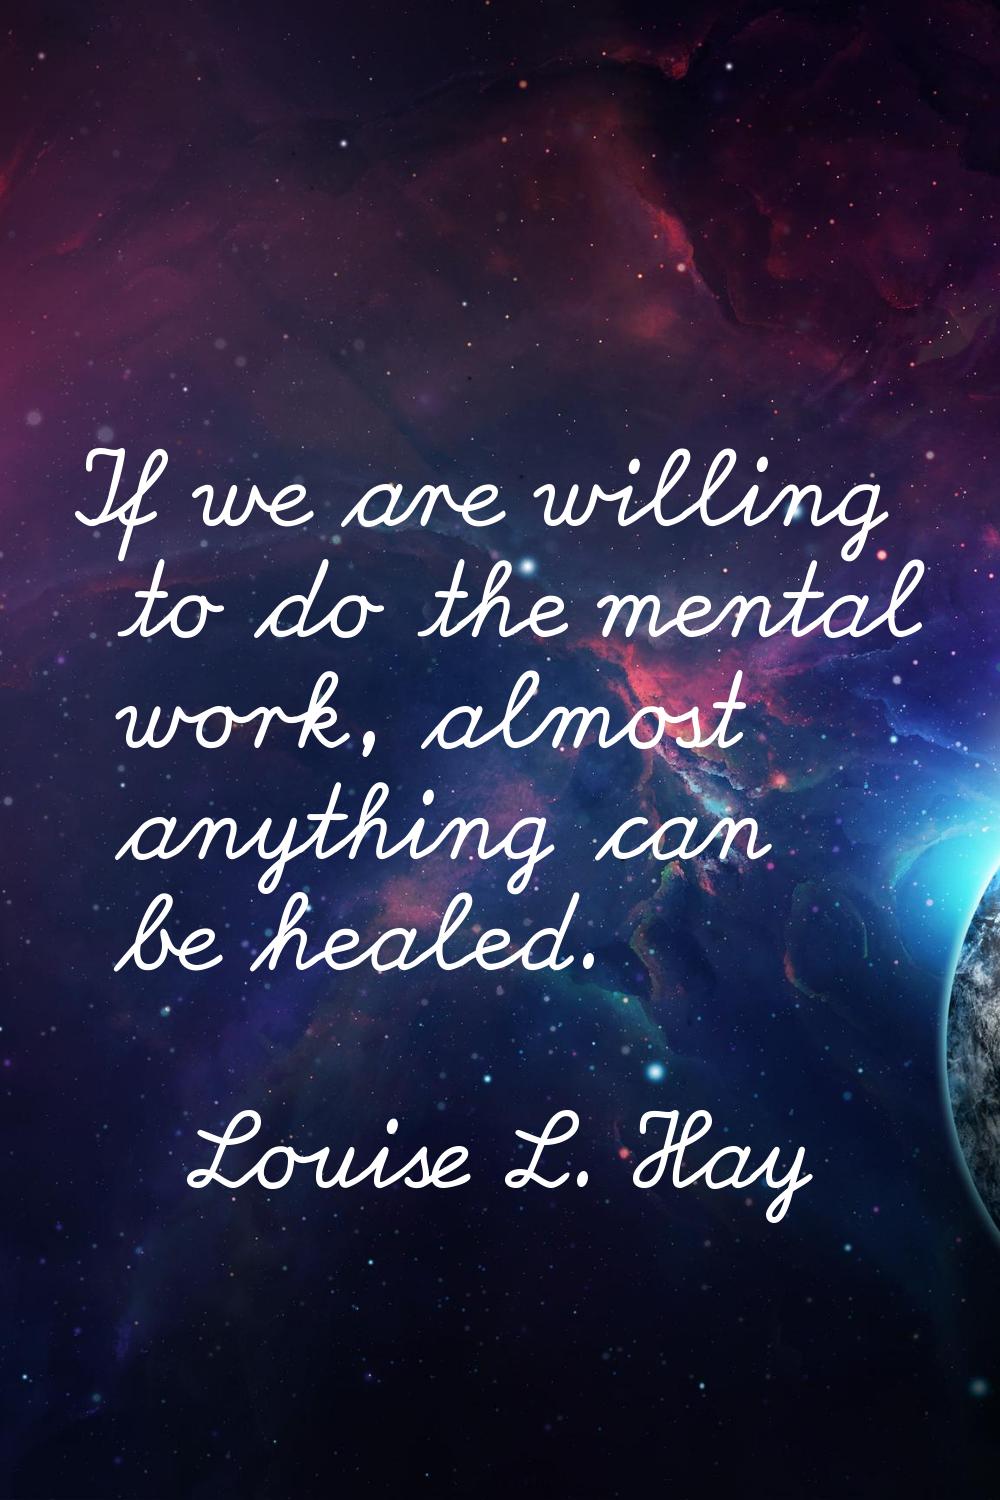 If we are willing to do the mental work, almost anything can be healed.